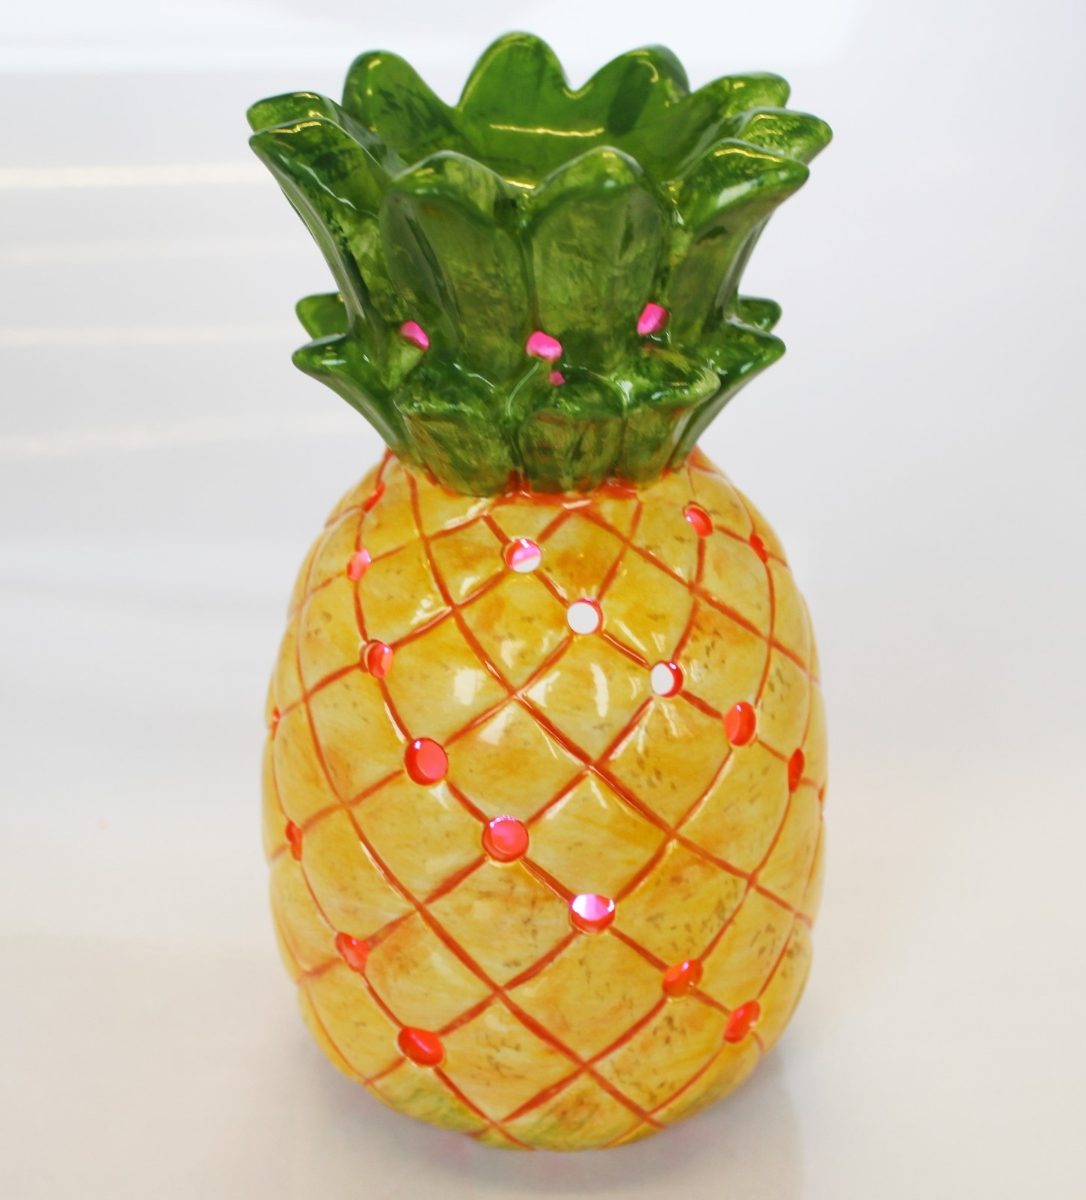 Pineapple Lantern with Pink LED (not included)